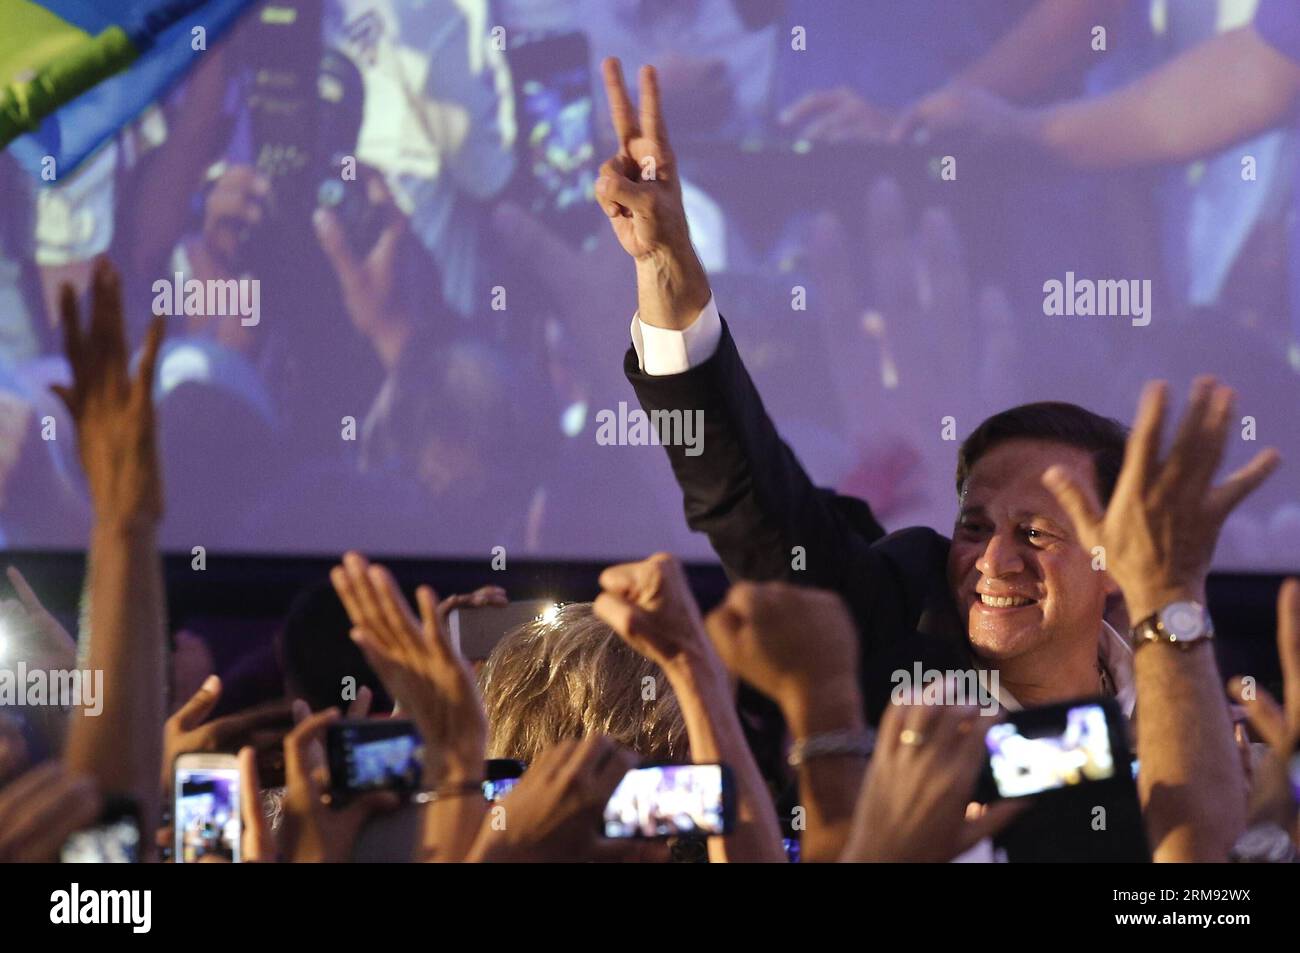 PANAMA CITY, May 4, 2014 (Xinhua) -- Presidential candidate Juan Carlos Varela (R) from the Panamenista Party greets his supporters after the preliminary results of the general elections, in Panama City, capital of Panama, on May 4, 2014. President of the Supreme Electoral Court Erasmo Pinilla said on Sunday night that Juan Carlos Varela is the virtual winner of Panama s presidency.(Xinhua/Mauricio Valenzuela) PANAMA-PANAMA CITY-POLITICS-ELECTIONS PUBLICATIONxNOTxINxCHN   Panama City May 4 2014 XINHUA Presidential Candidate Juan Carlos Varela r from The  Party greets His Supporters After The p Stock Photo